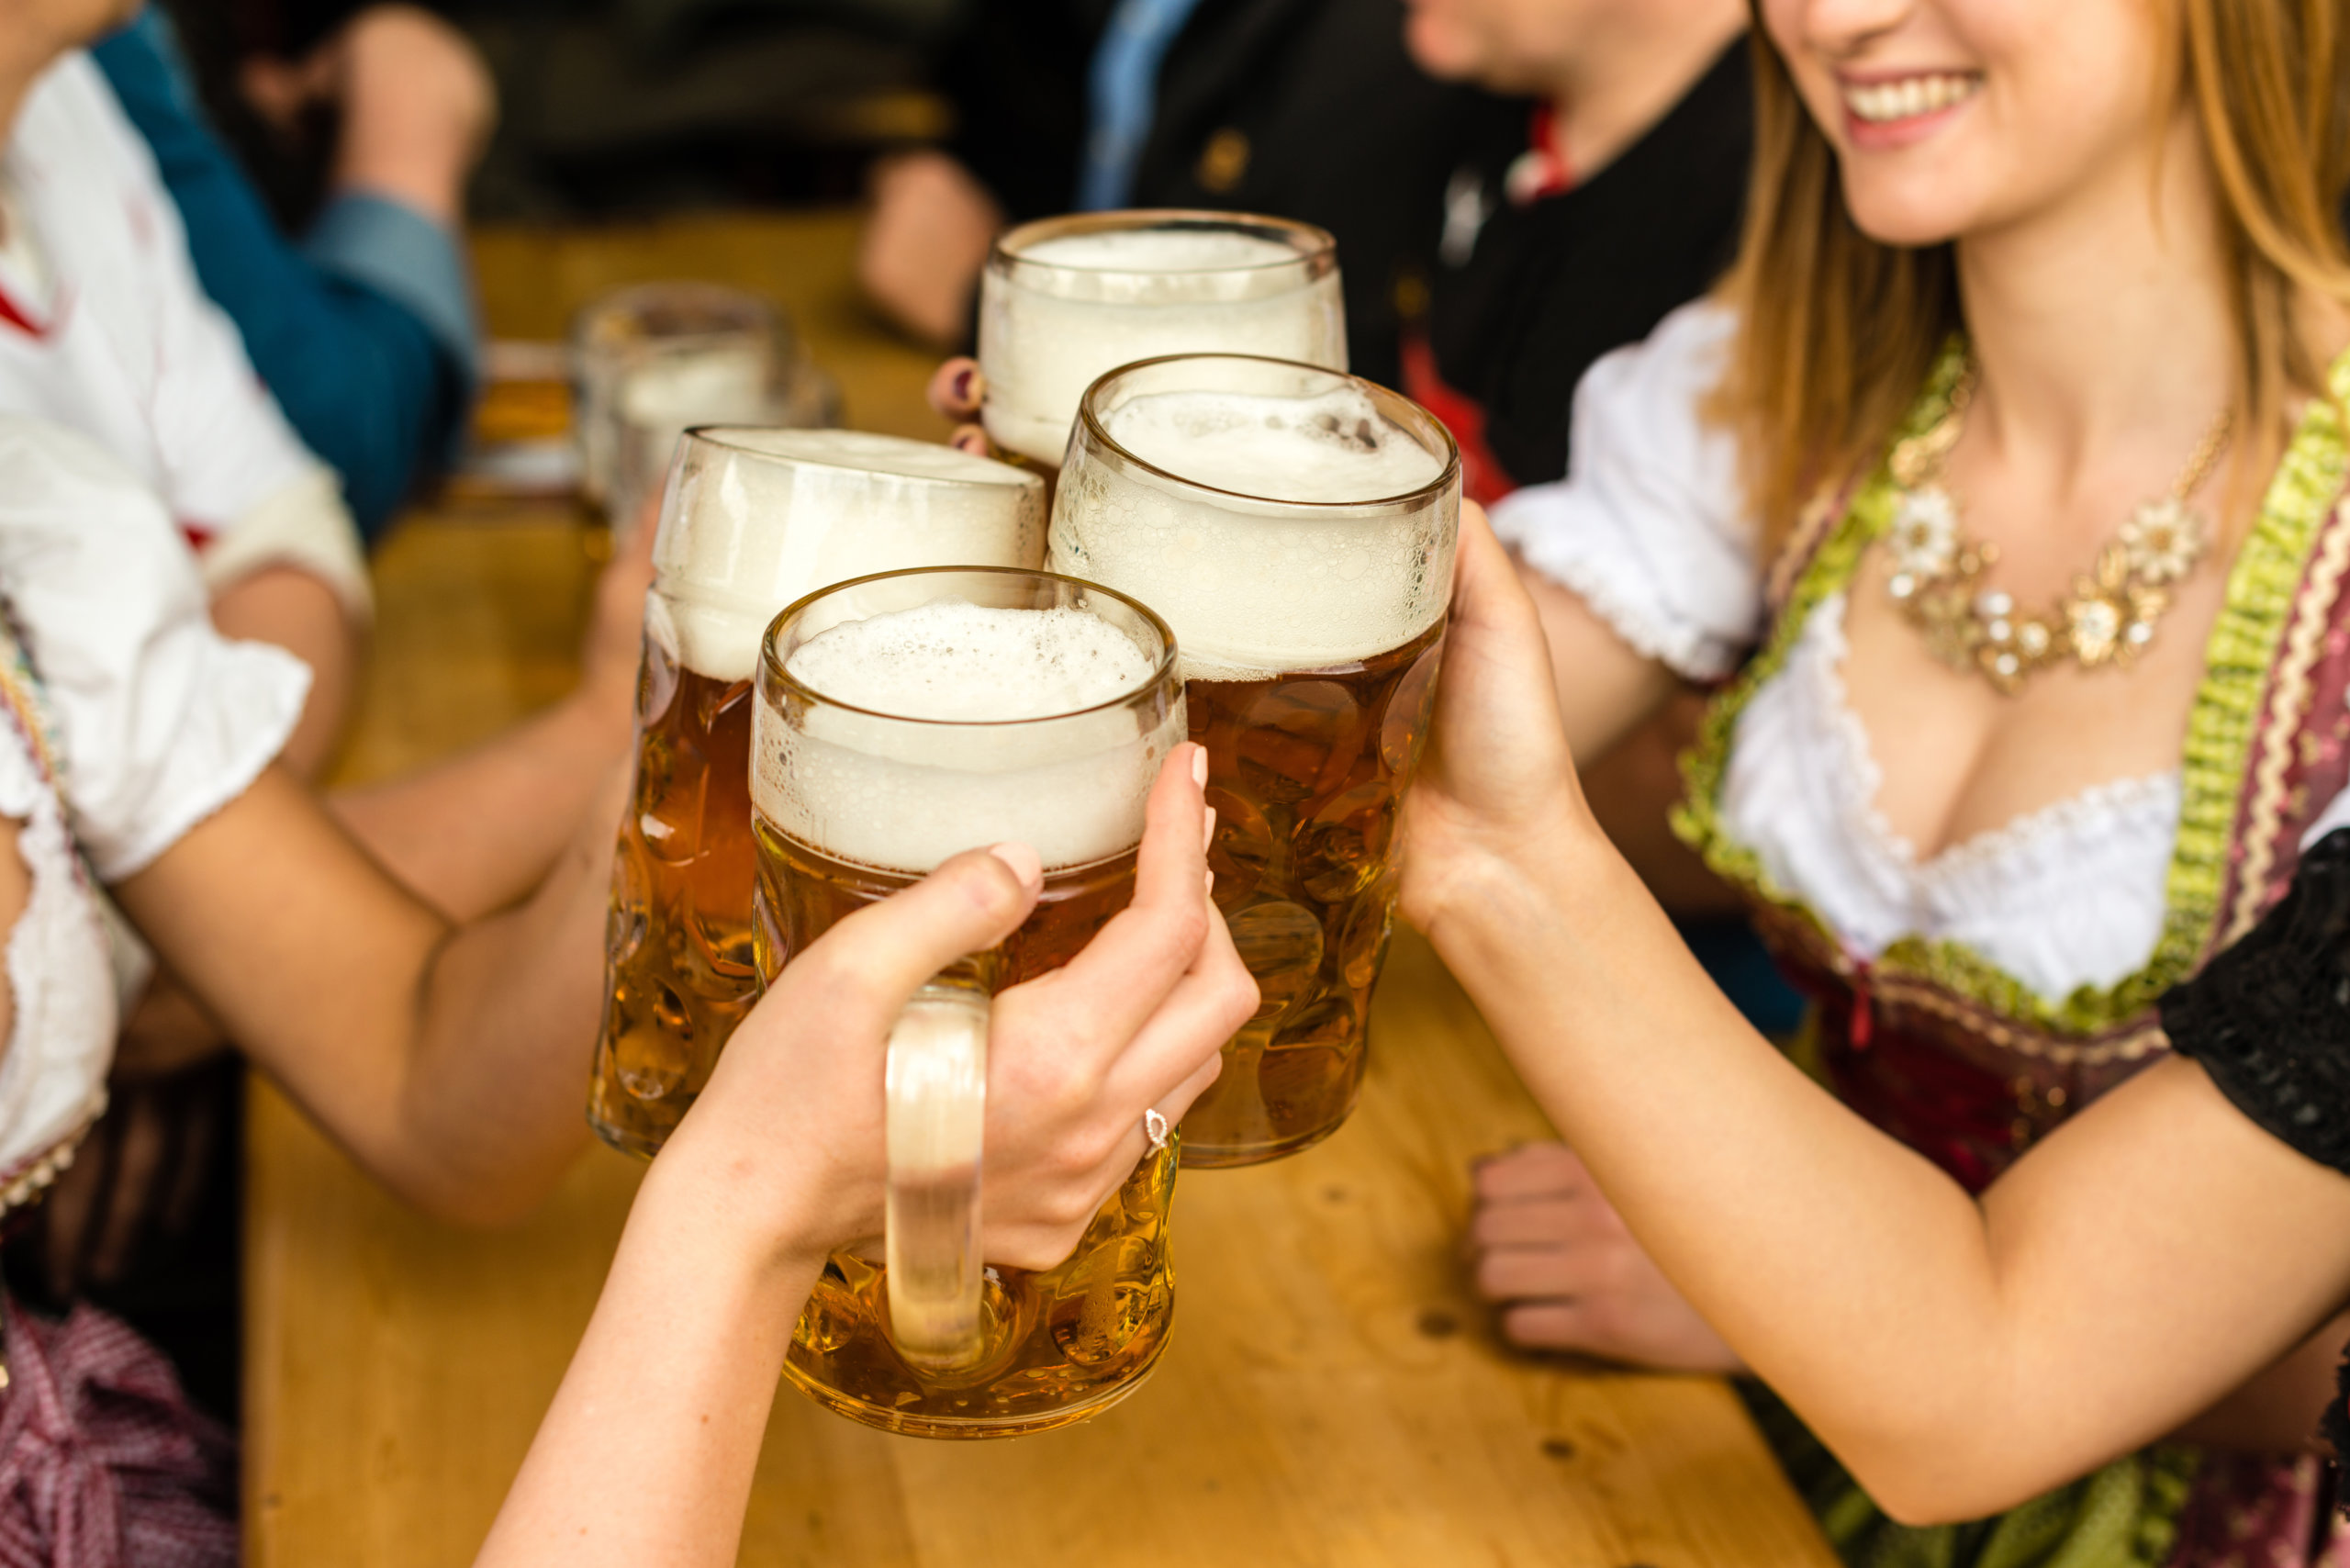 Bavarian girls in traditional Dirndl dresses are drinking beer and having fun at the Oktoberfest in Riverhead